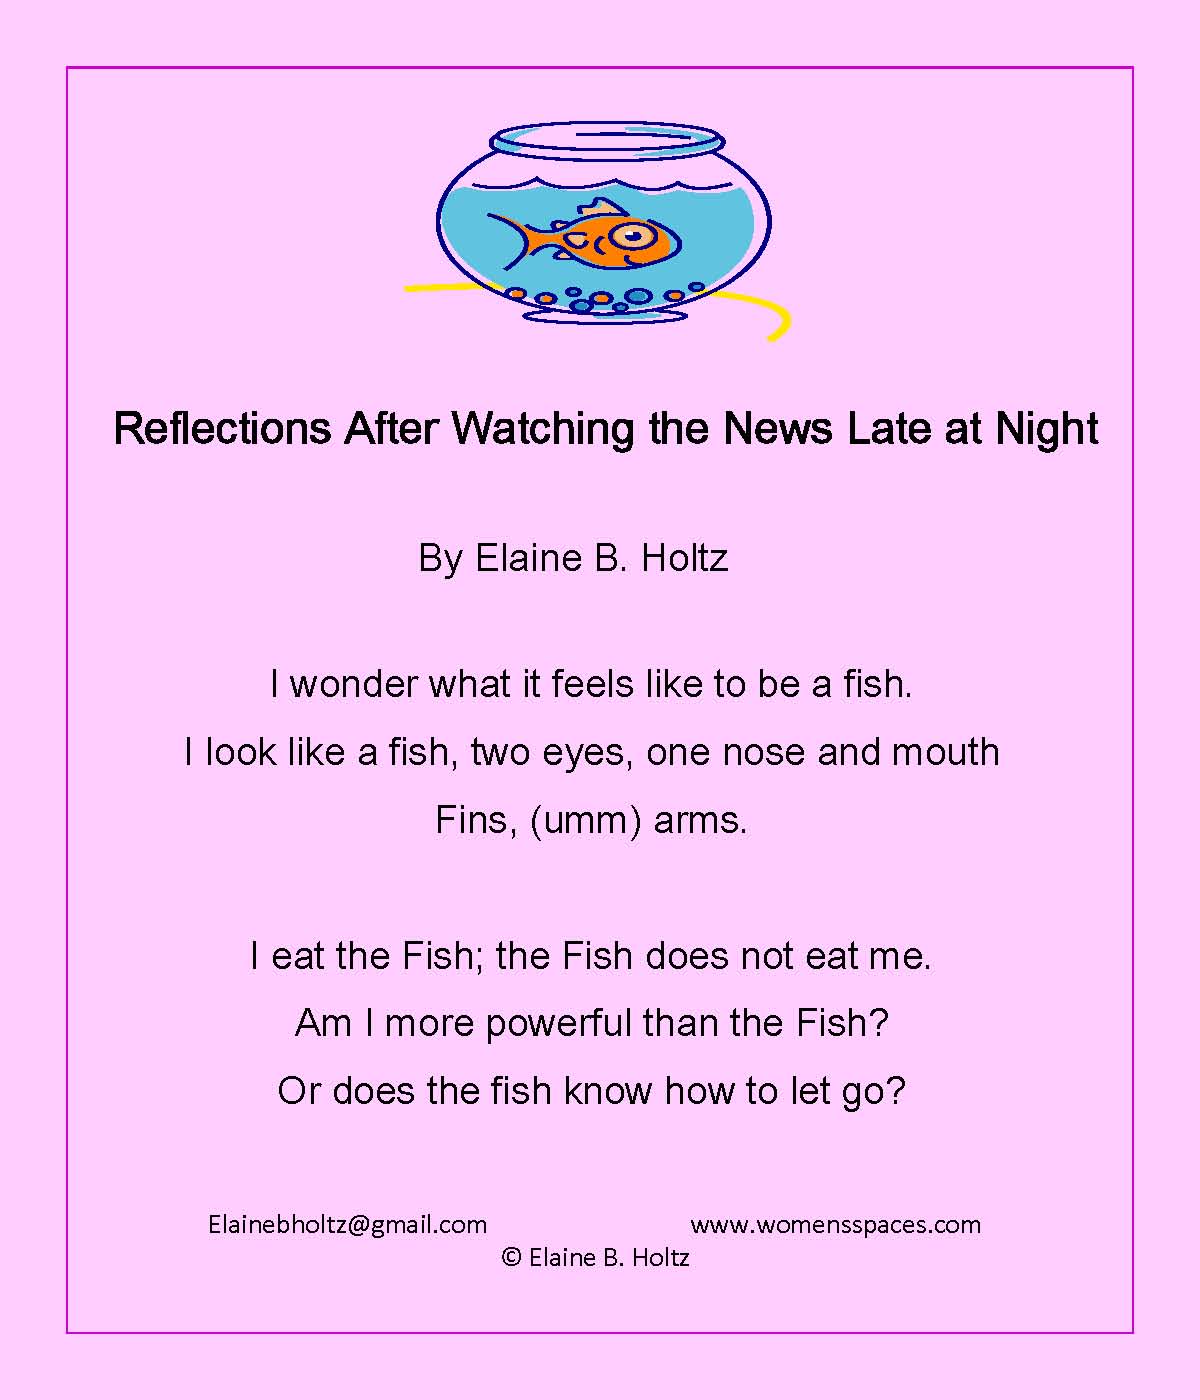 Reflections After Watching the News Late at Night  by Elaine B. Holtz